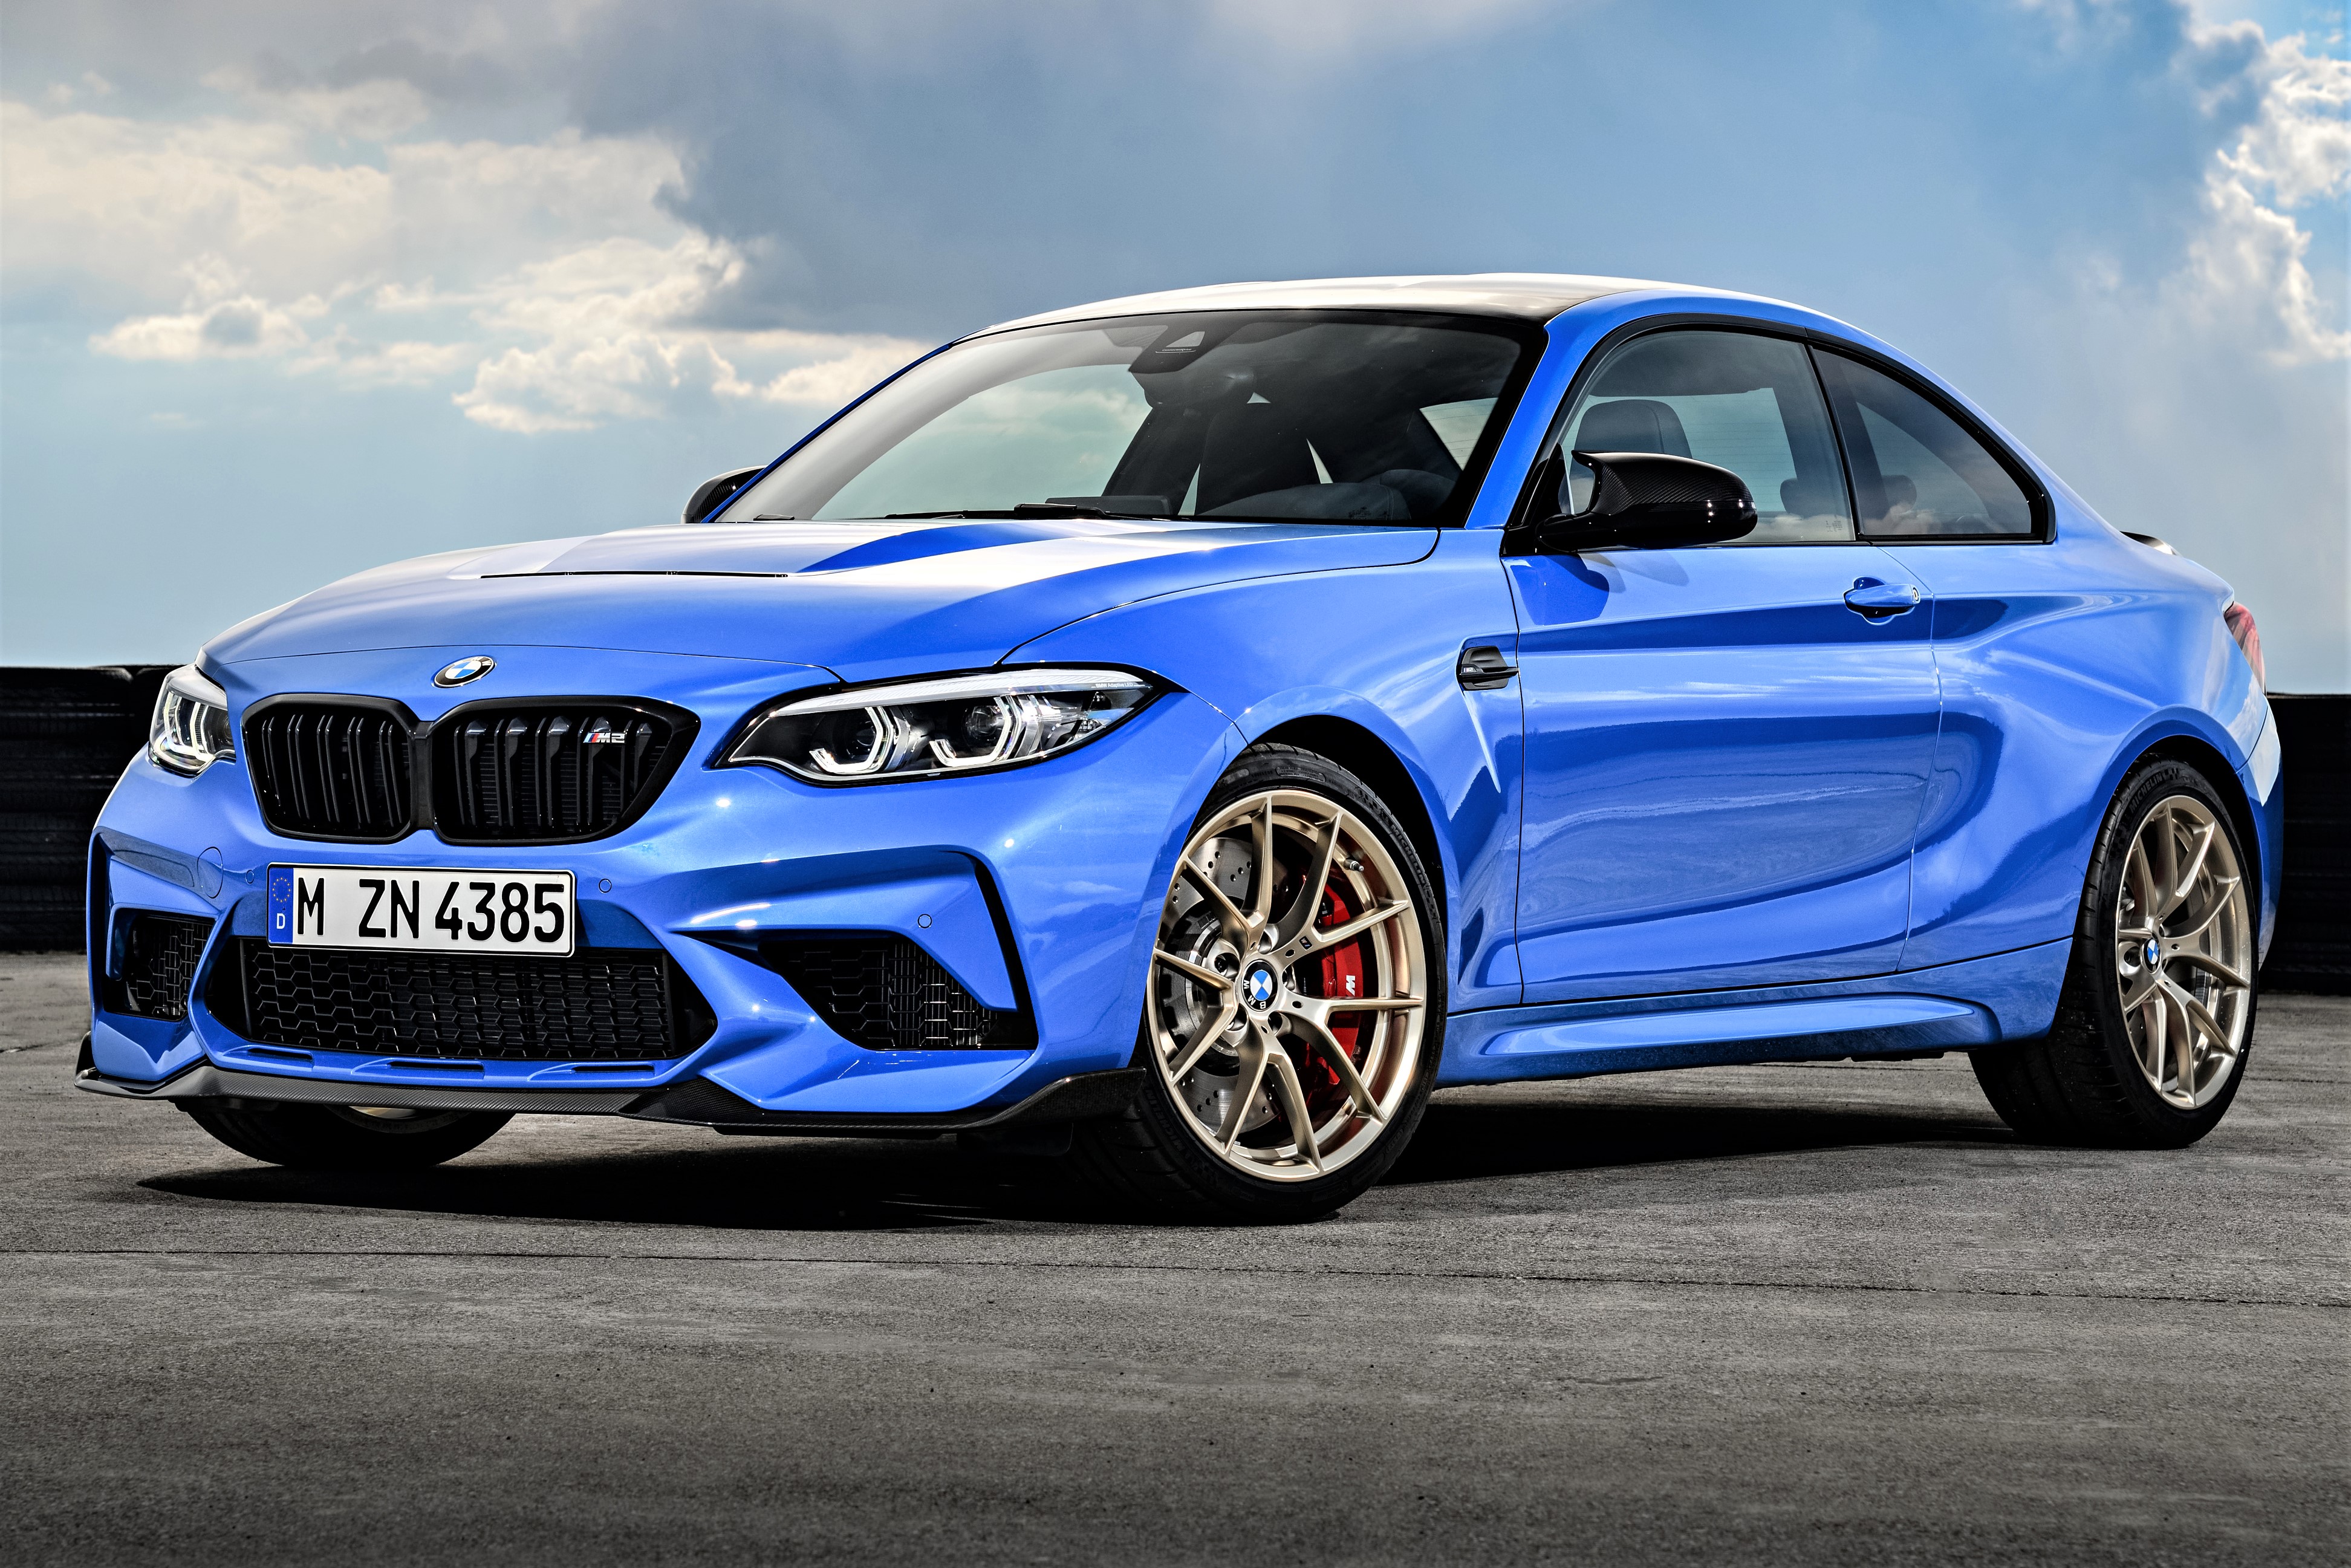 BMW Introduces 444-hp M2 CS Coupe